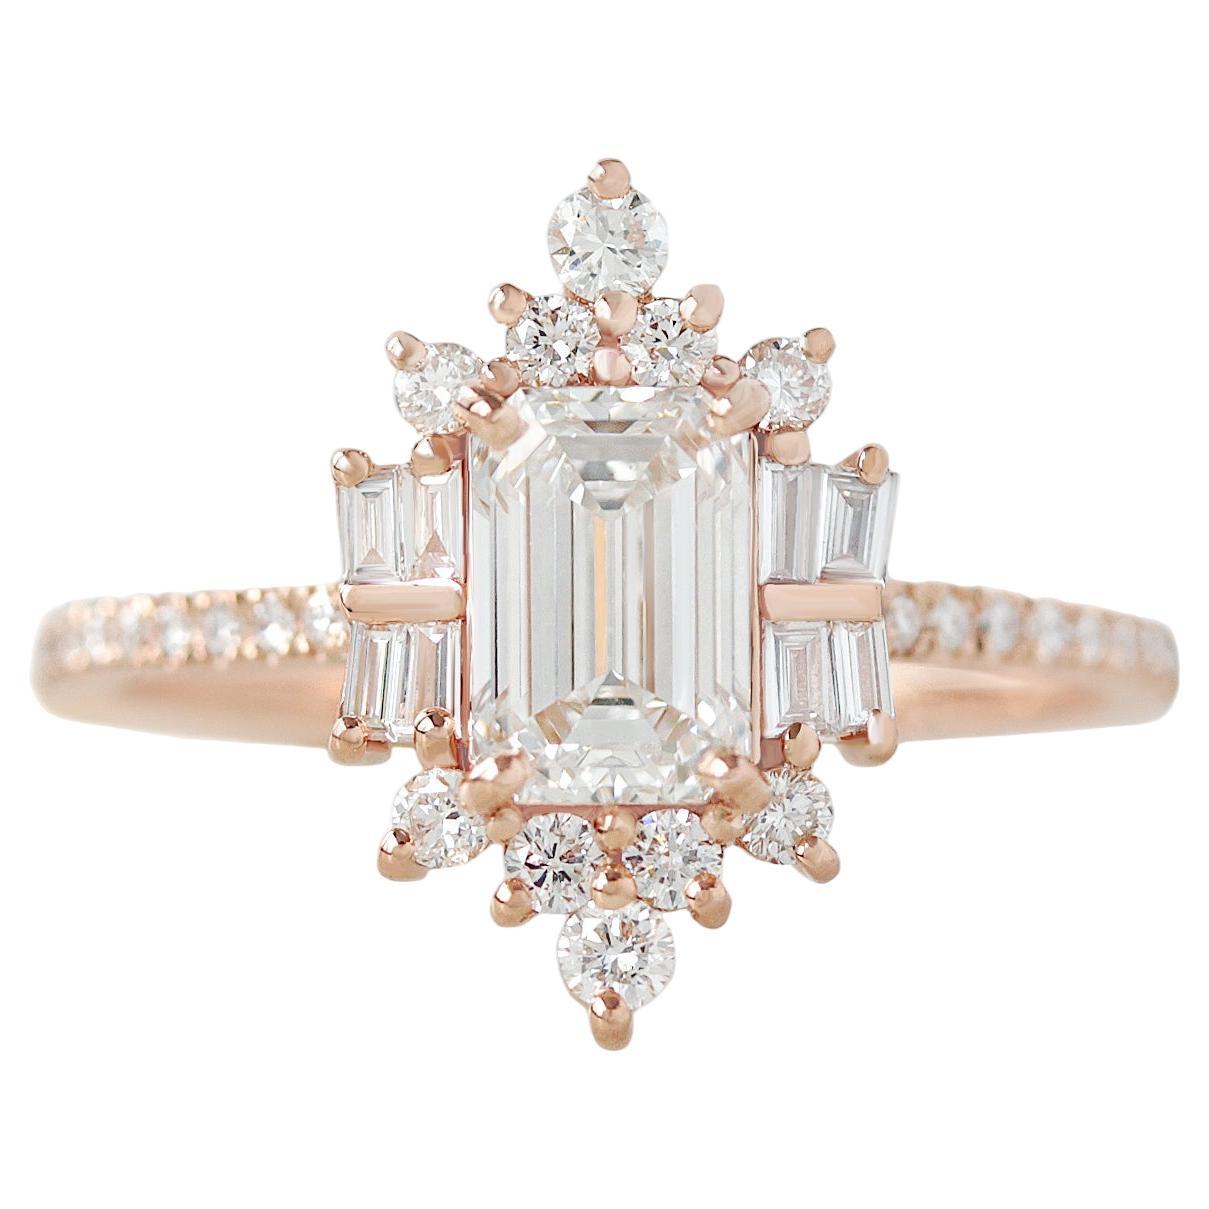 For Sale:  Emerald Cut Diamond Ring Unique Art Deco Engagement Ring The Mirror Palace